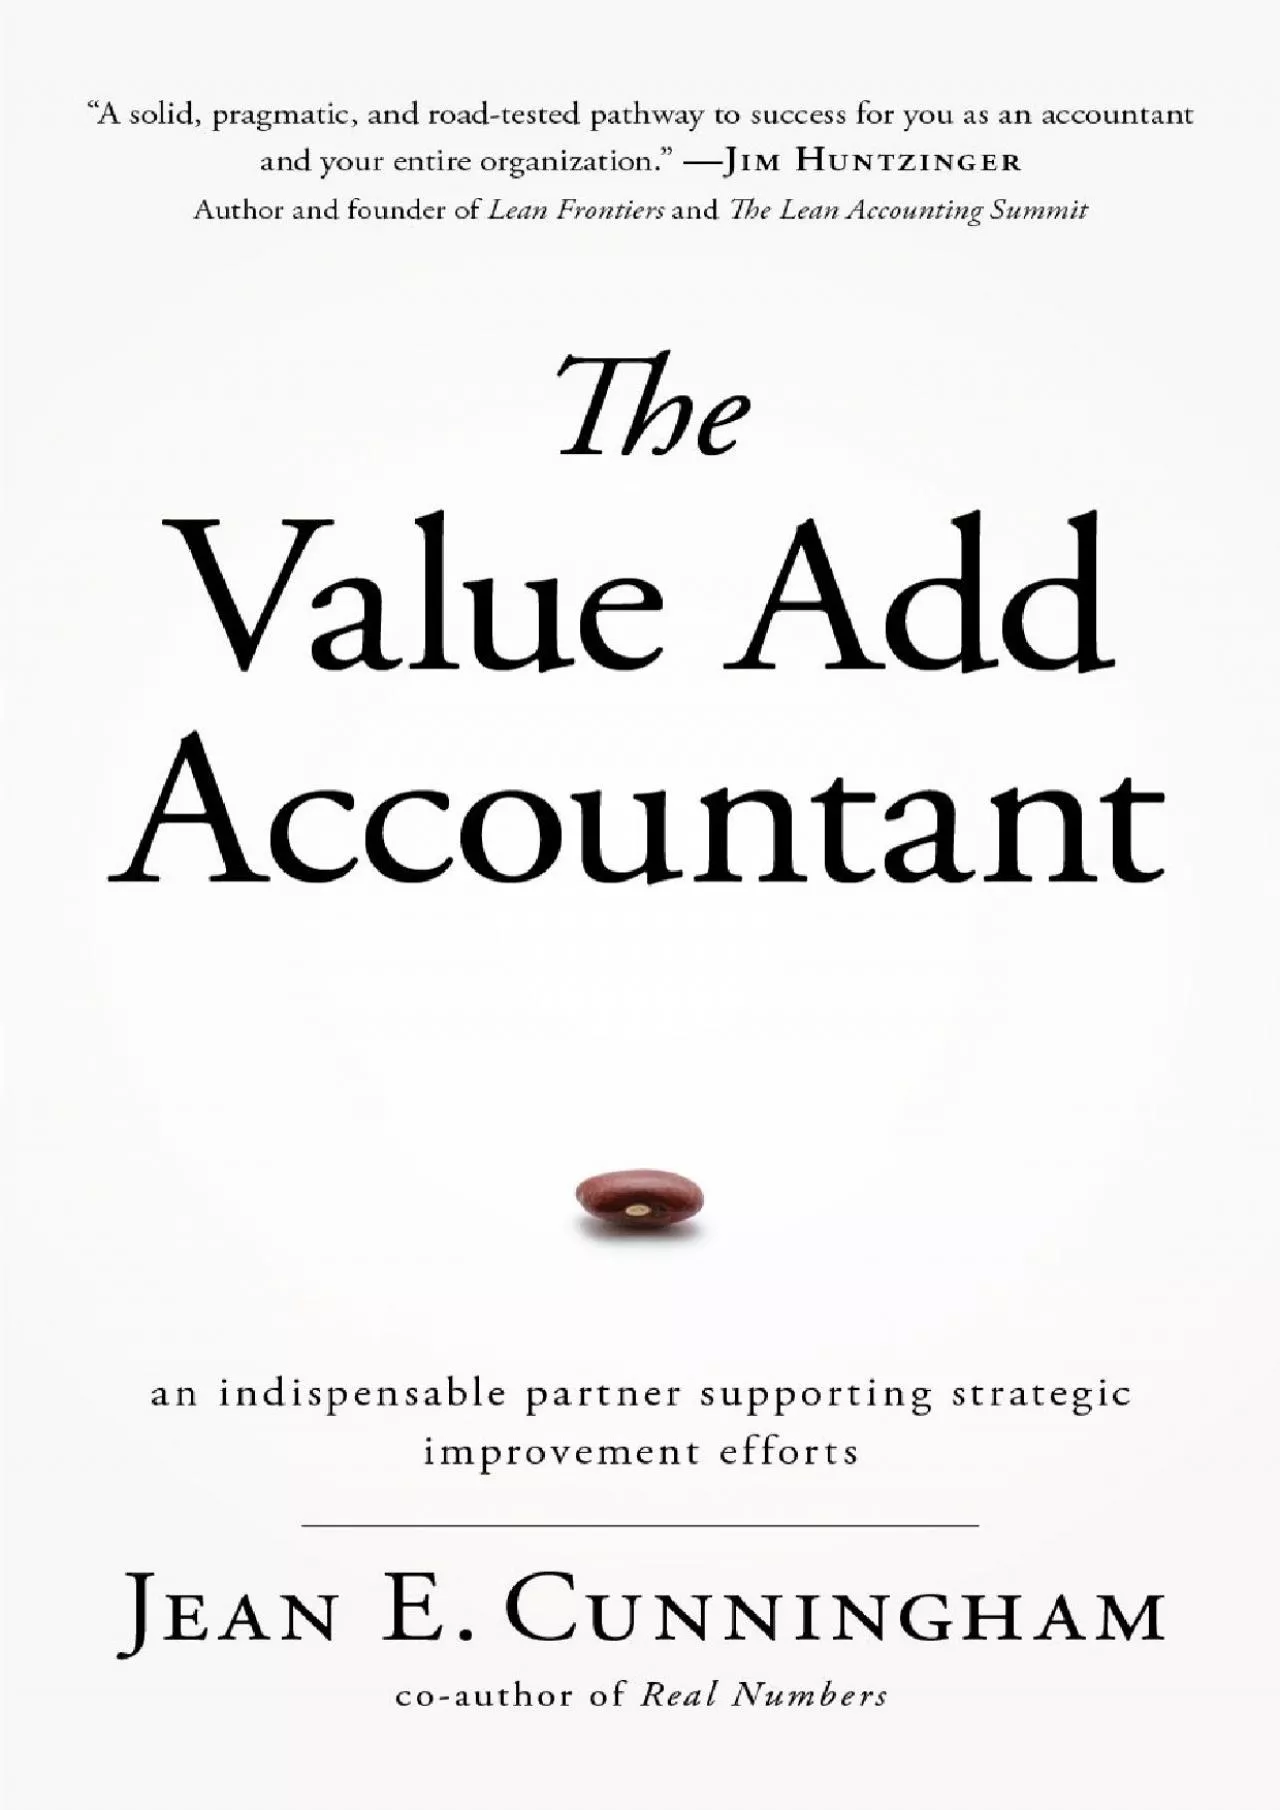 The Value Add Accountant: an indispensable partner supporting strategic improvement efforts